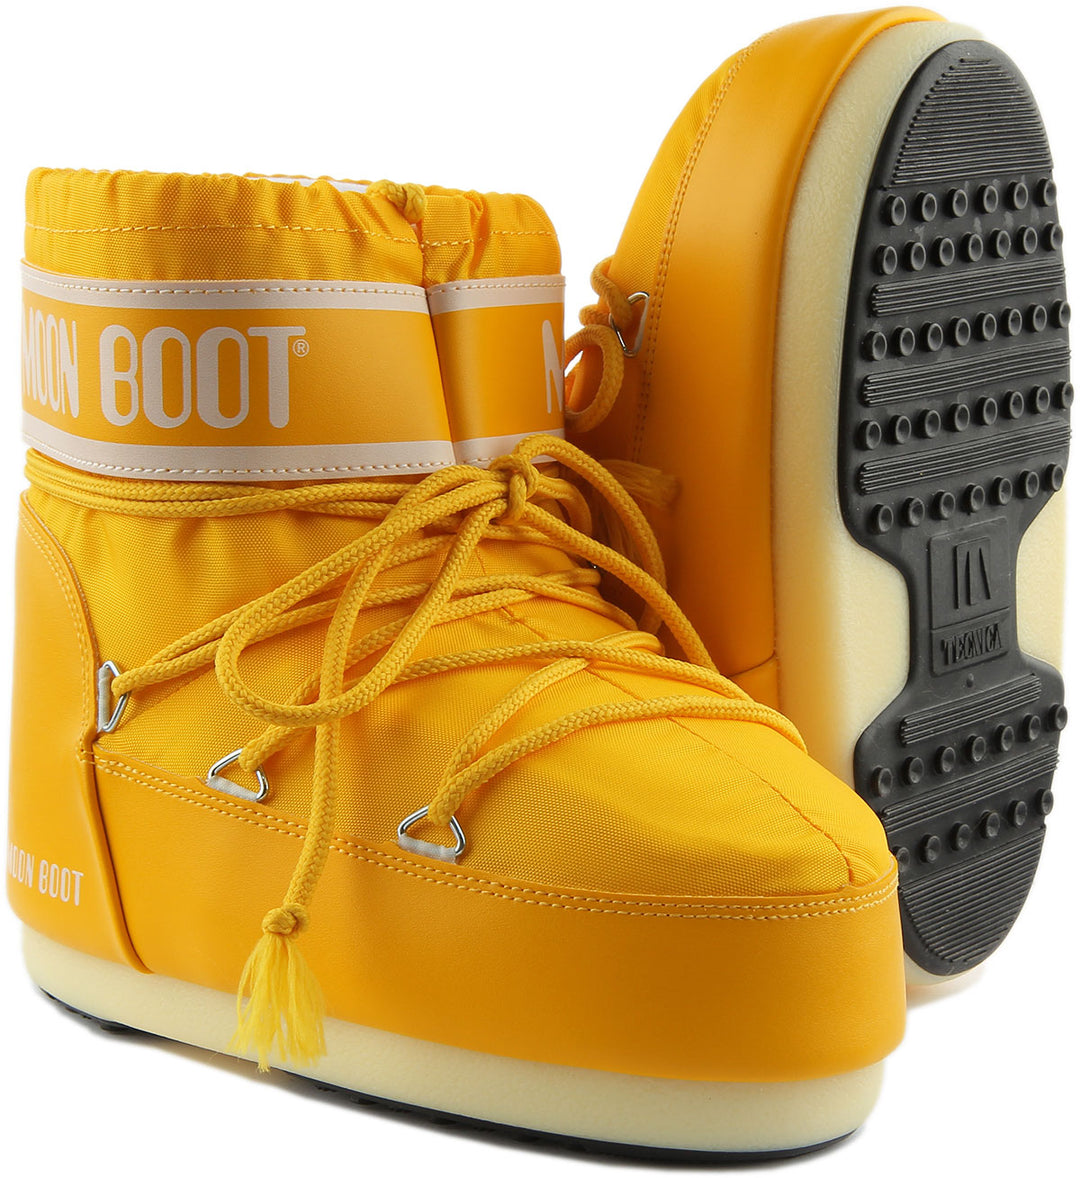 Moon Boot Classic Low 2 In Yellow For Women